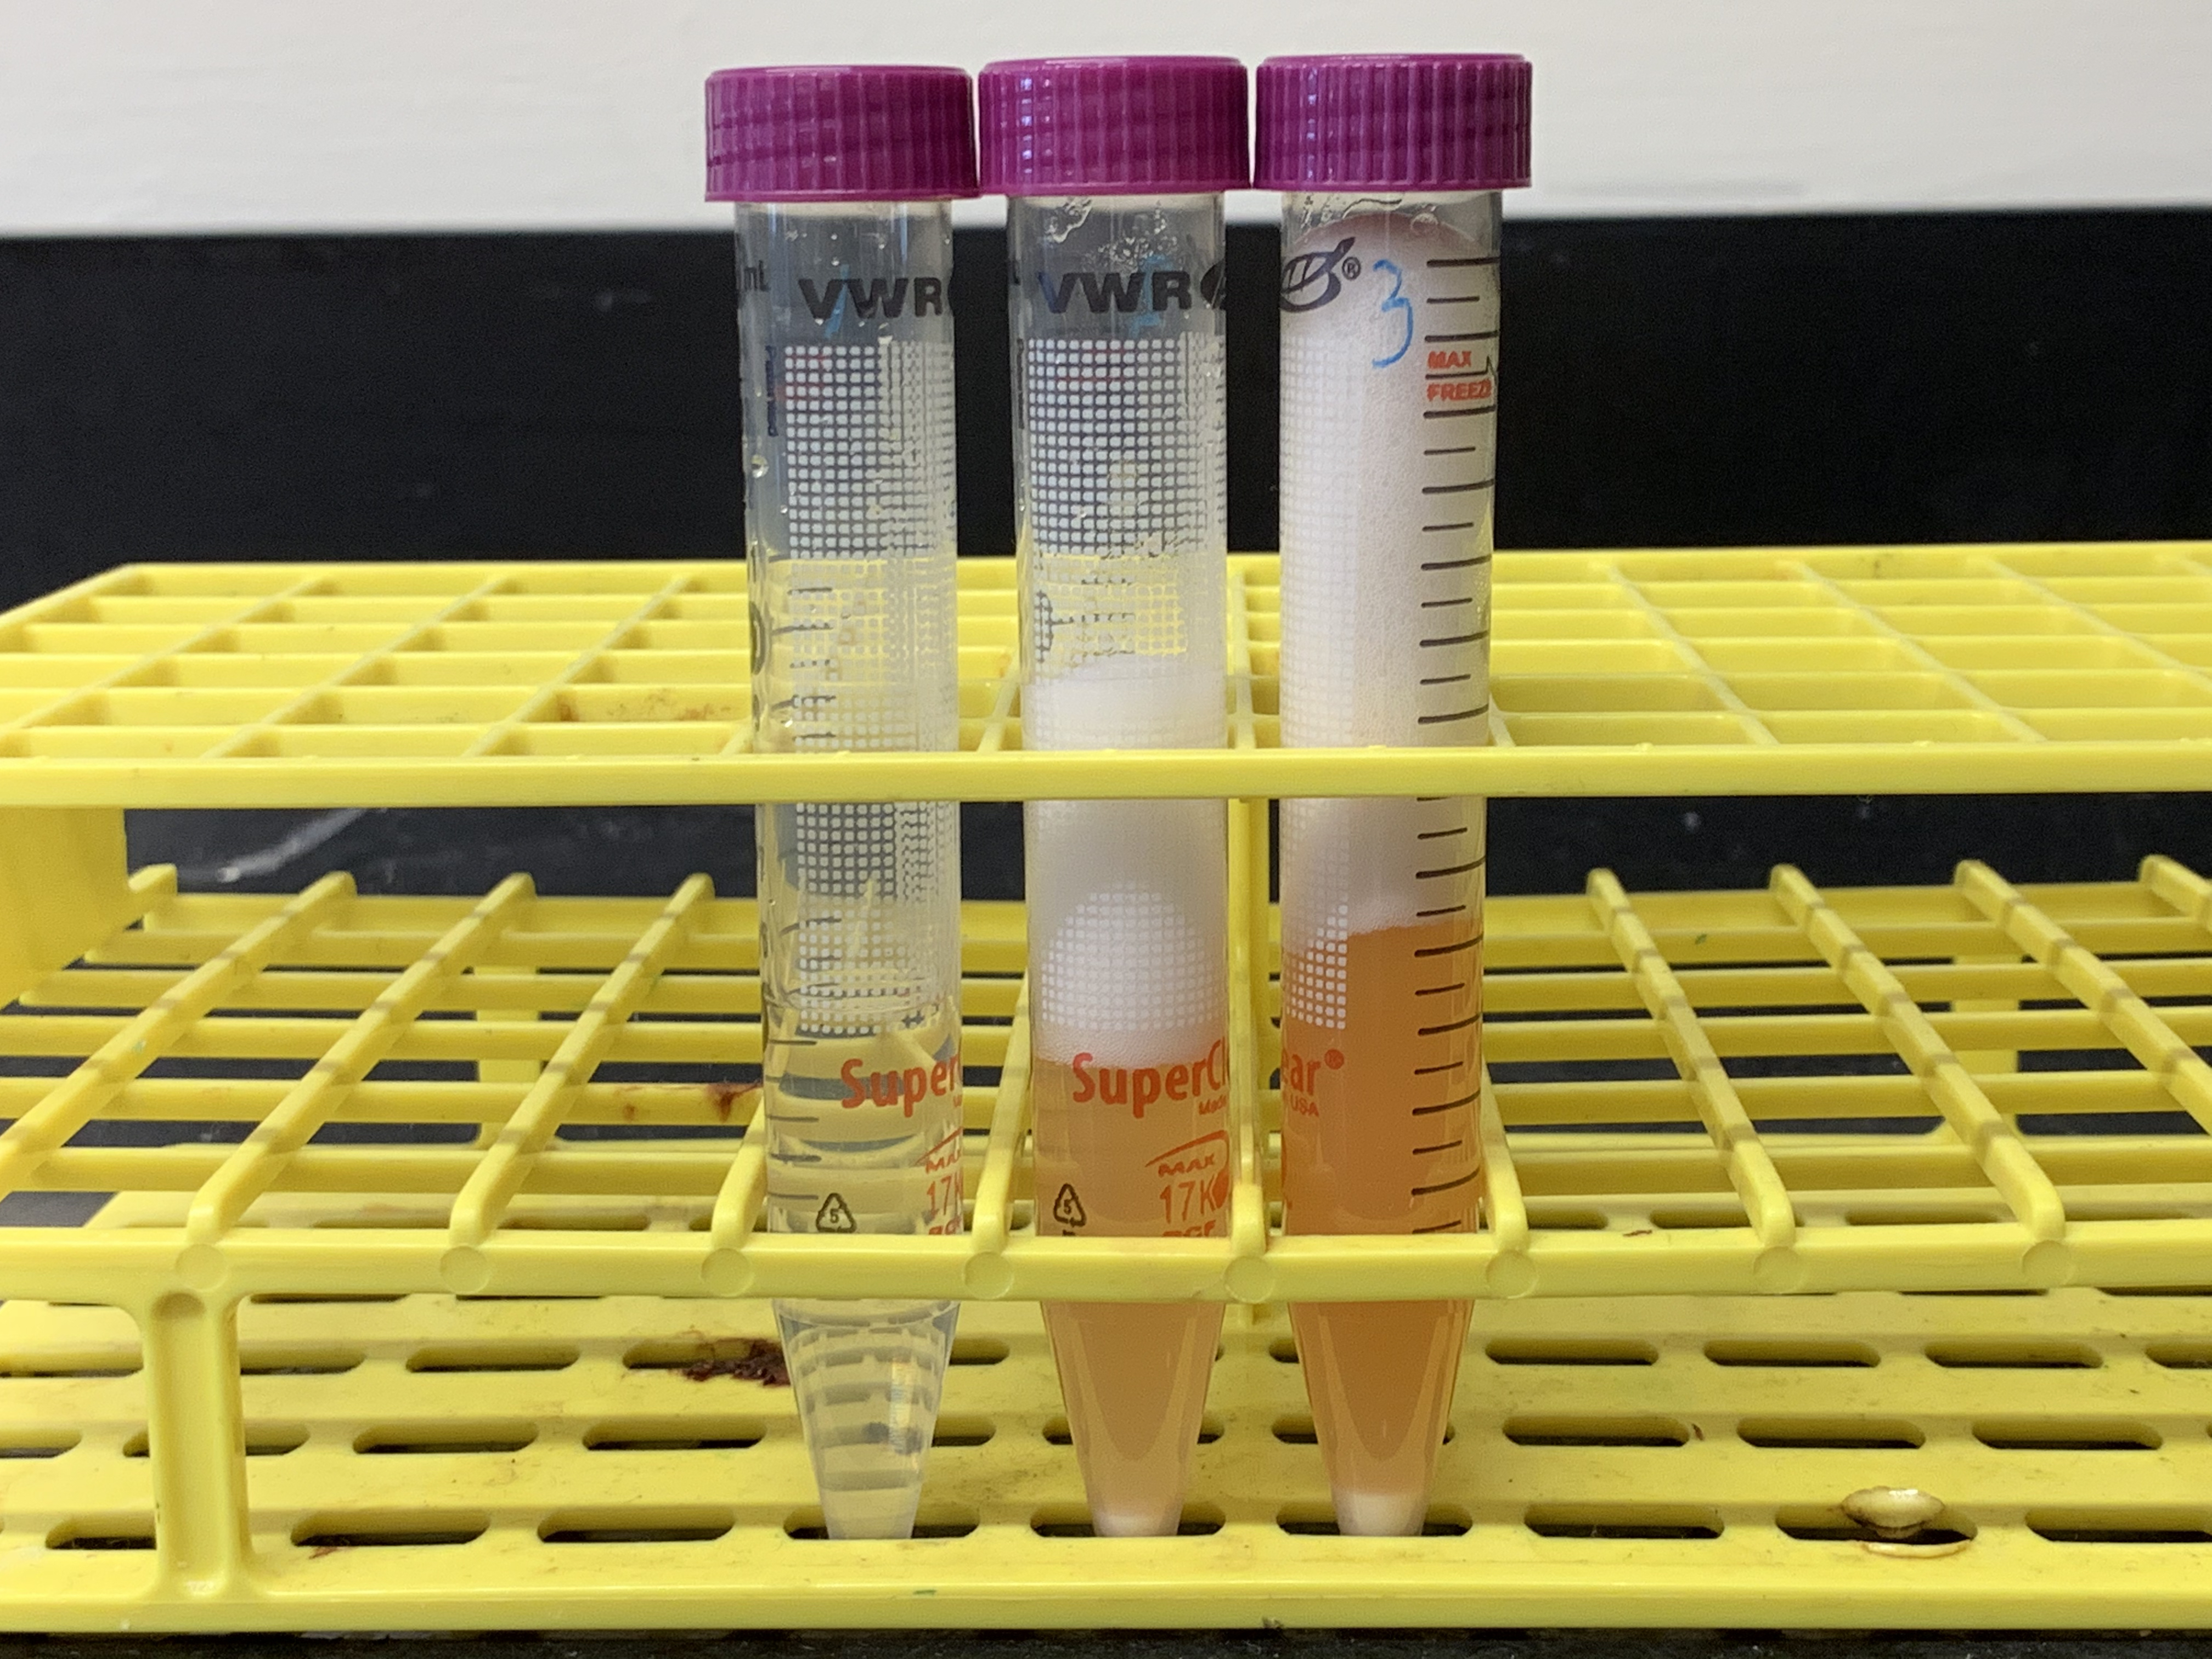 Results from experiment 3. The tubes in the picture correspond from left to right to tubes 1 to 3 in table 8.3. What conclusions can you draw from the results of this experiment as shown in this figure?